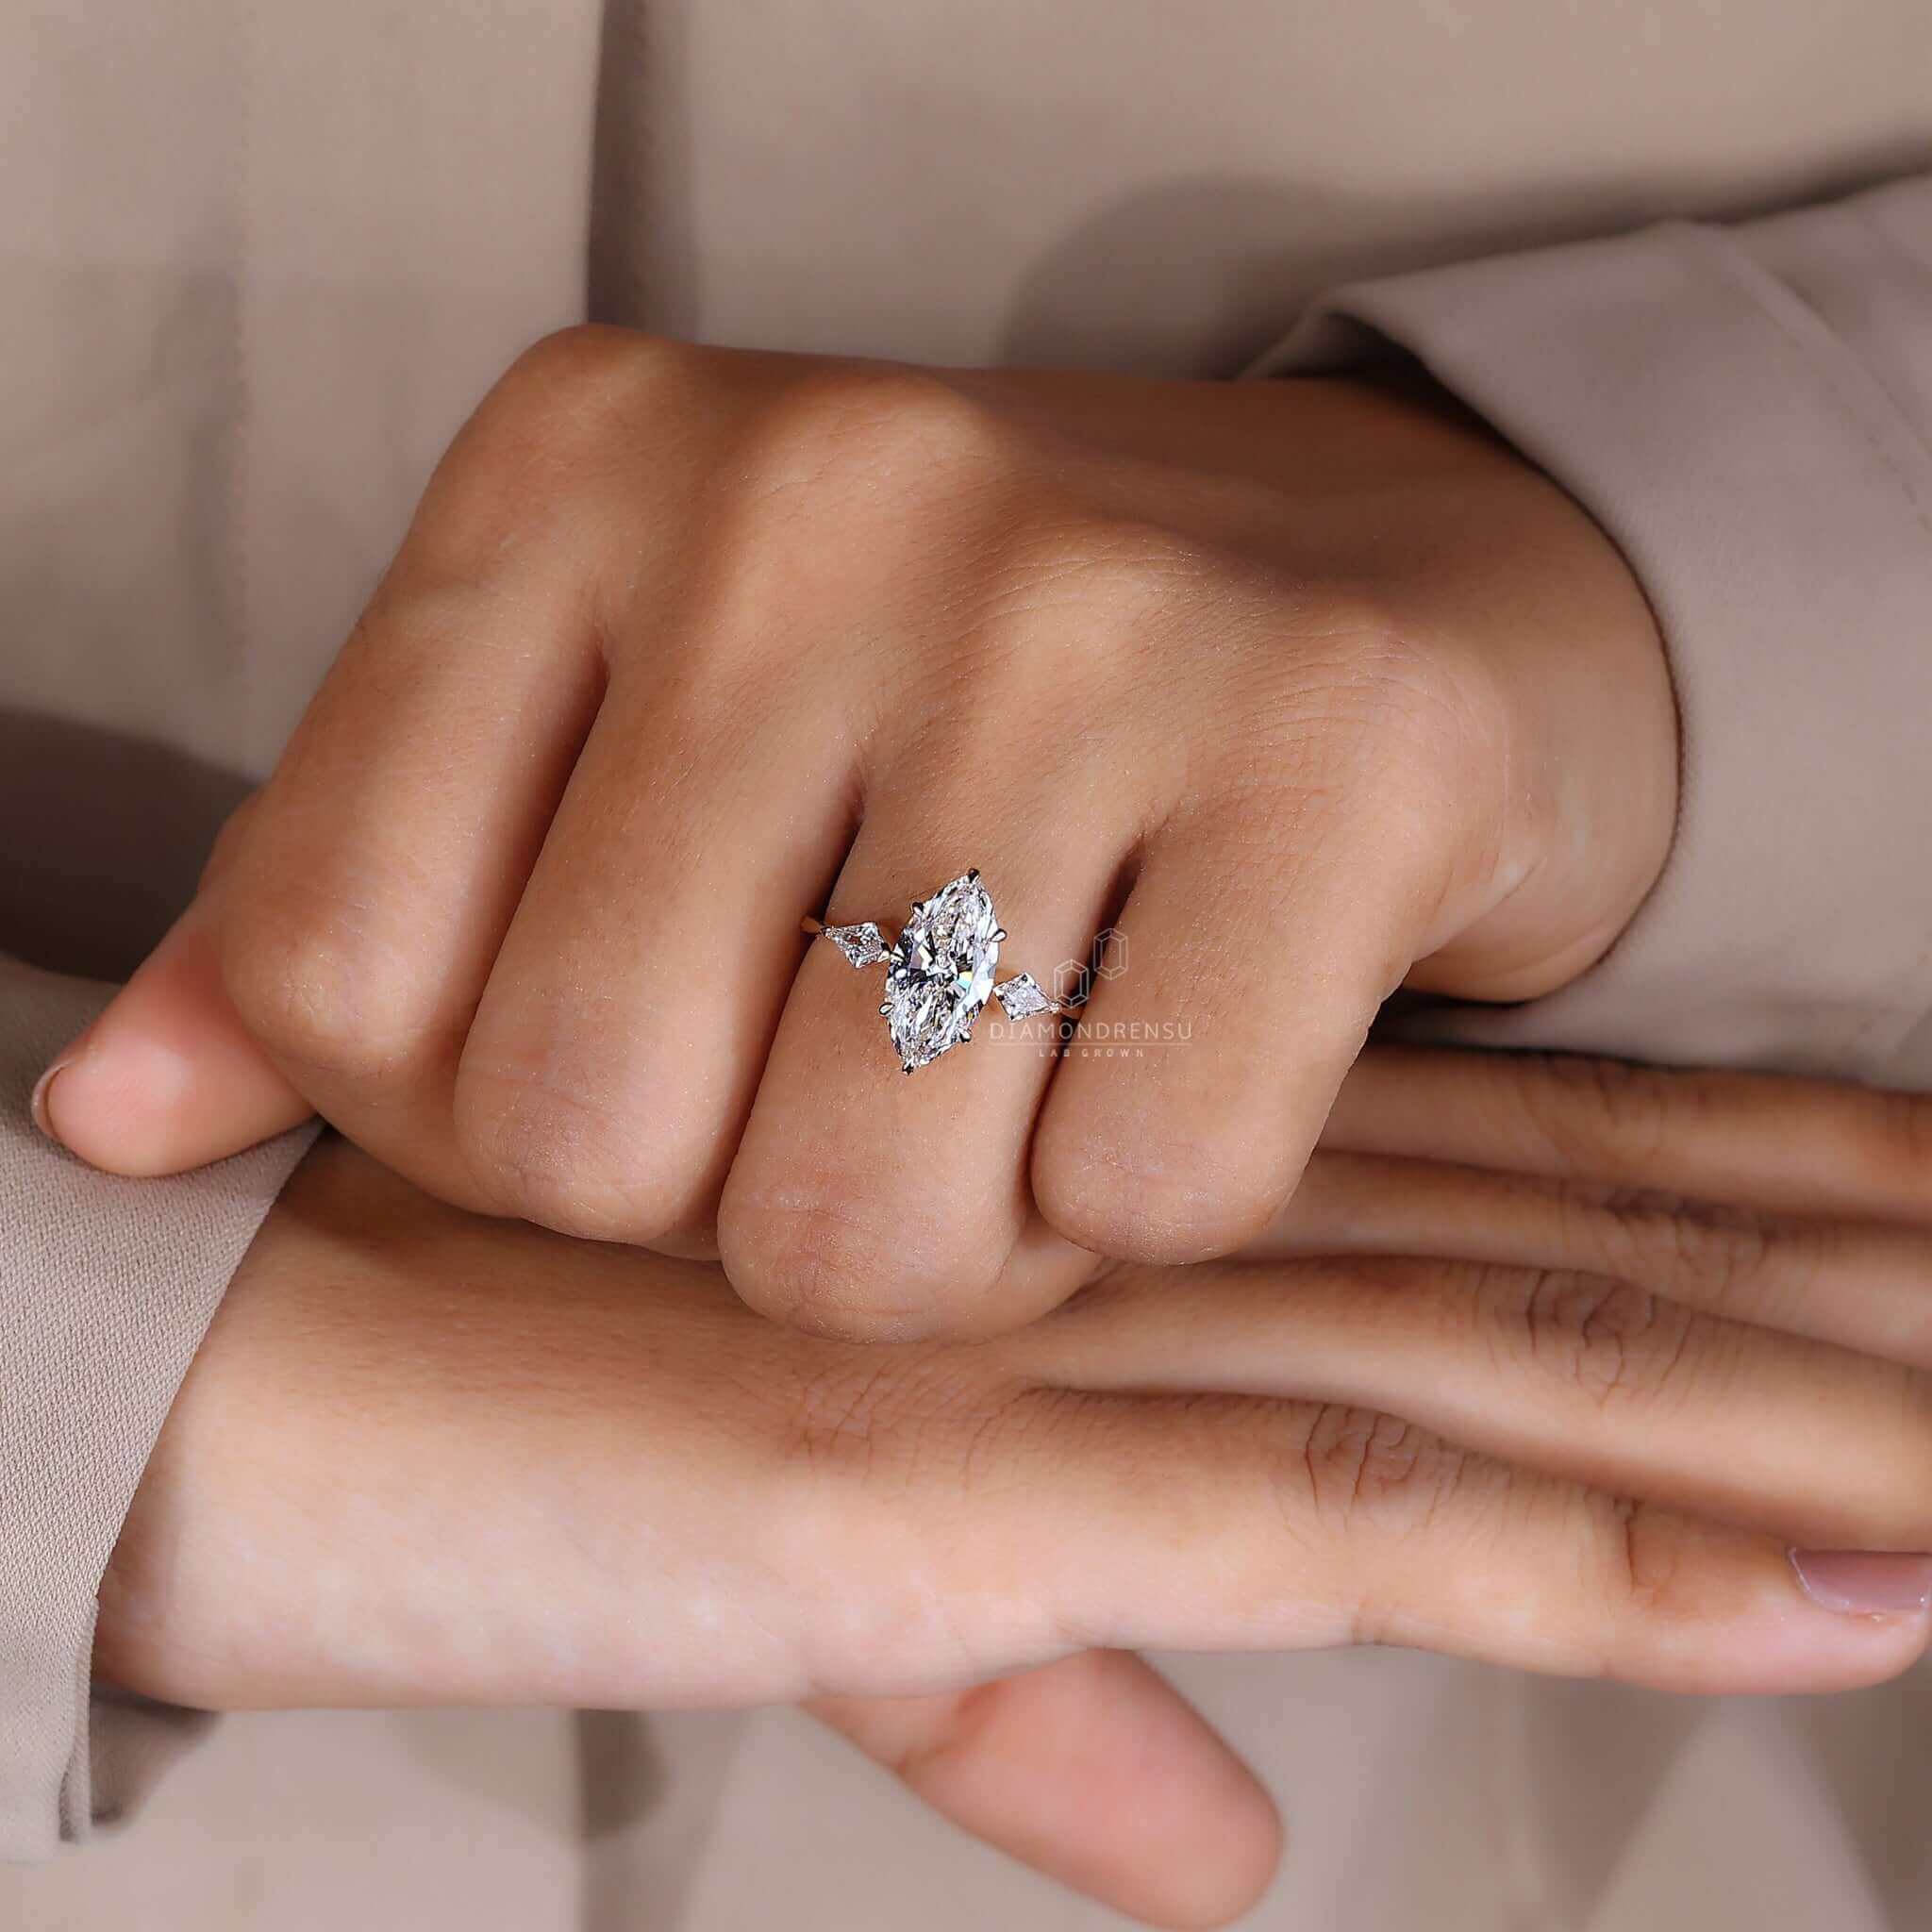 A hand wearing a big diamond engagement ring, a symbol of love and commitment.